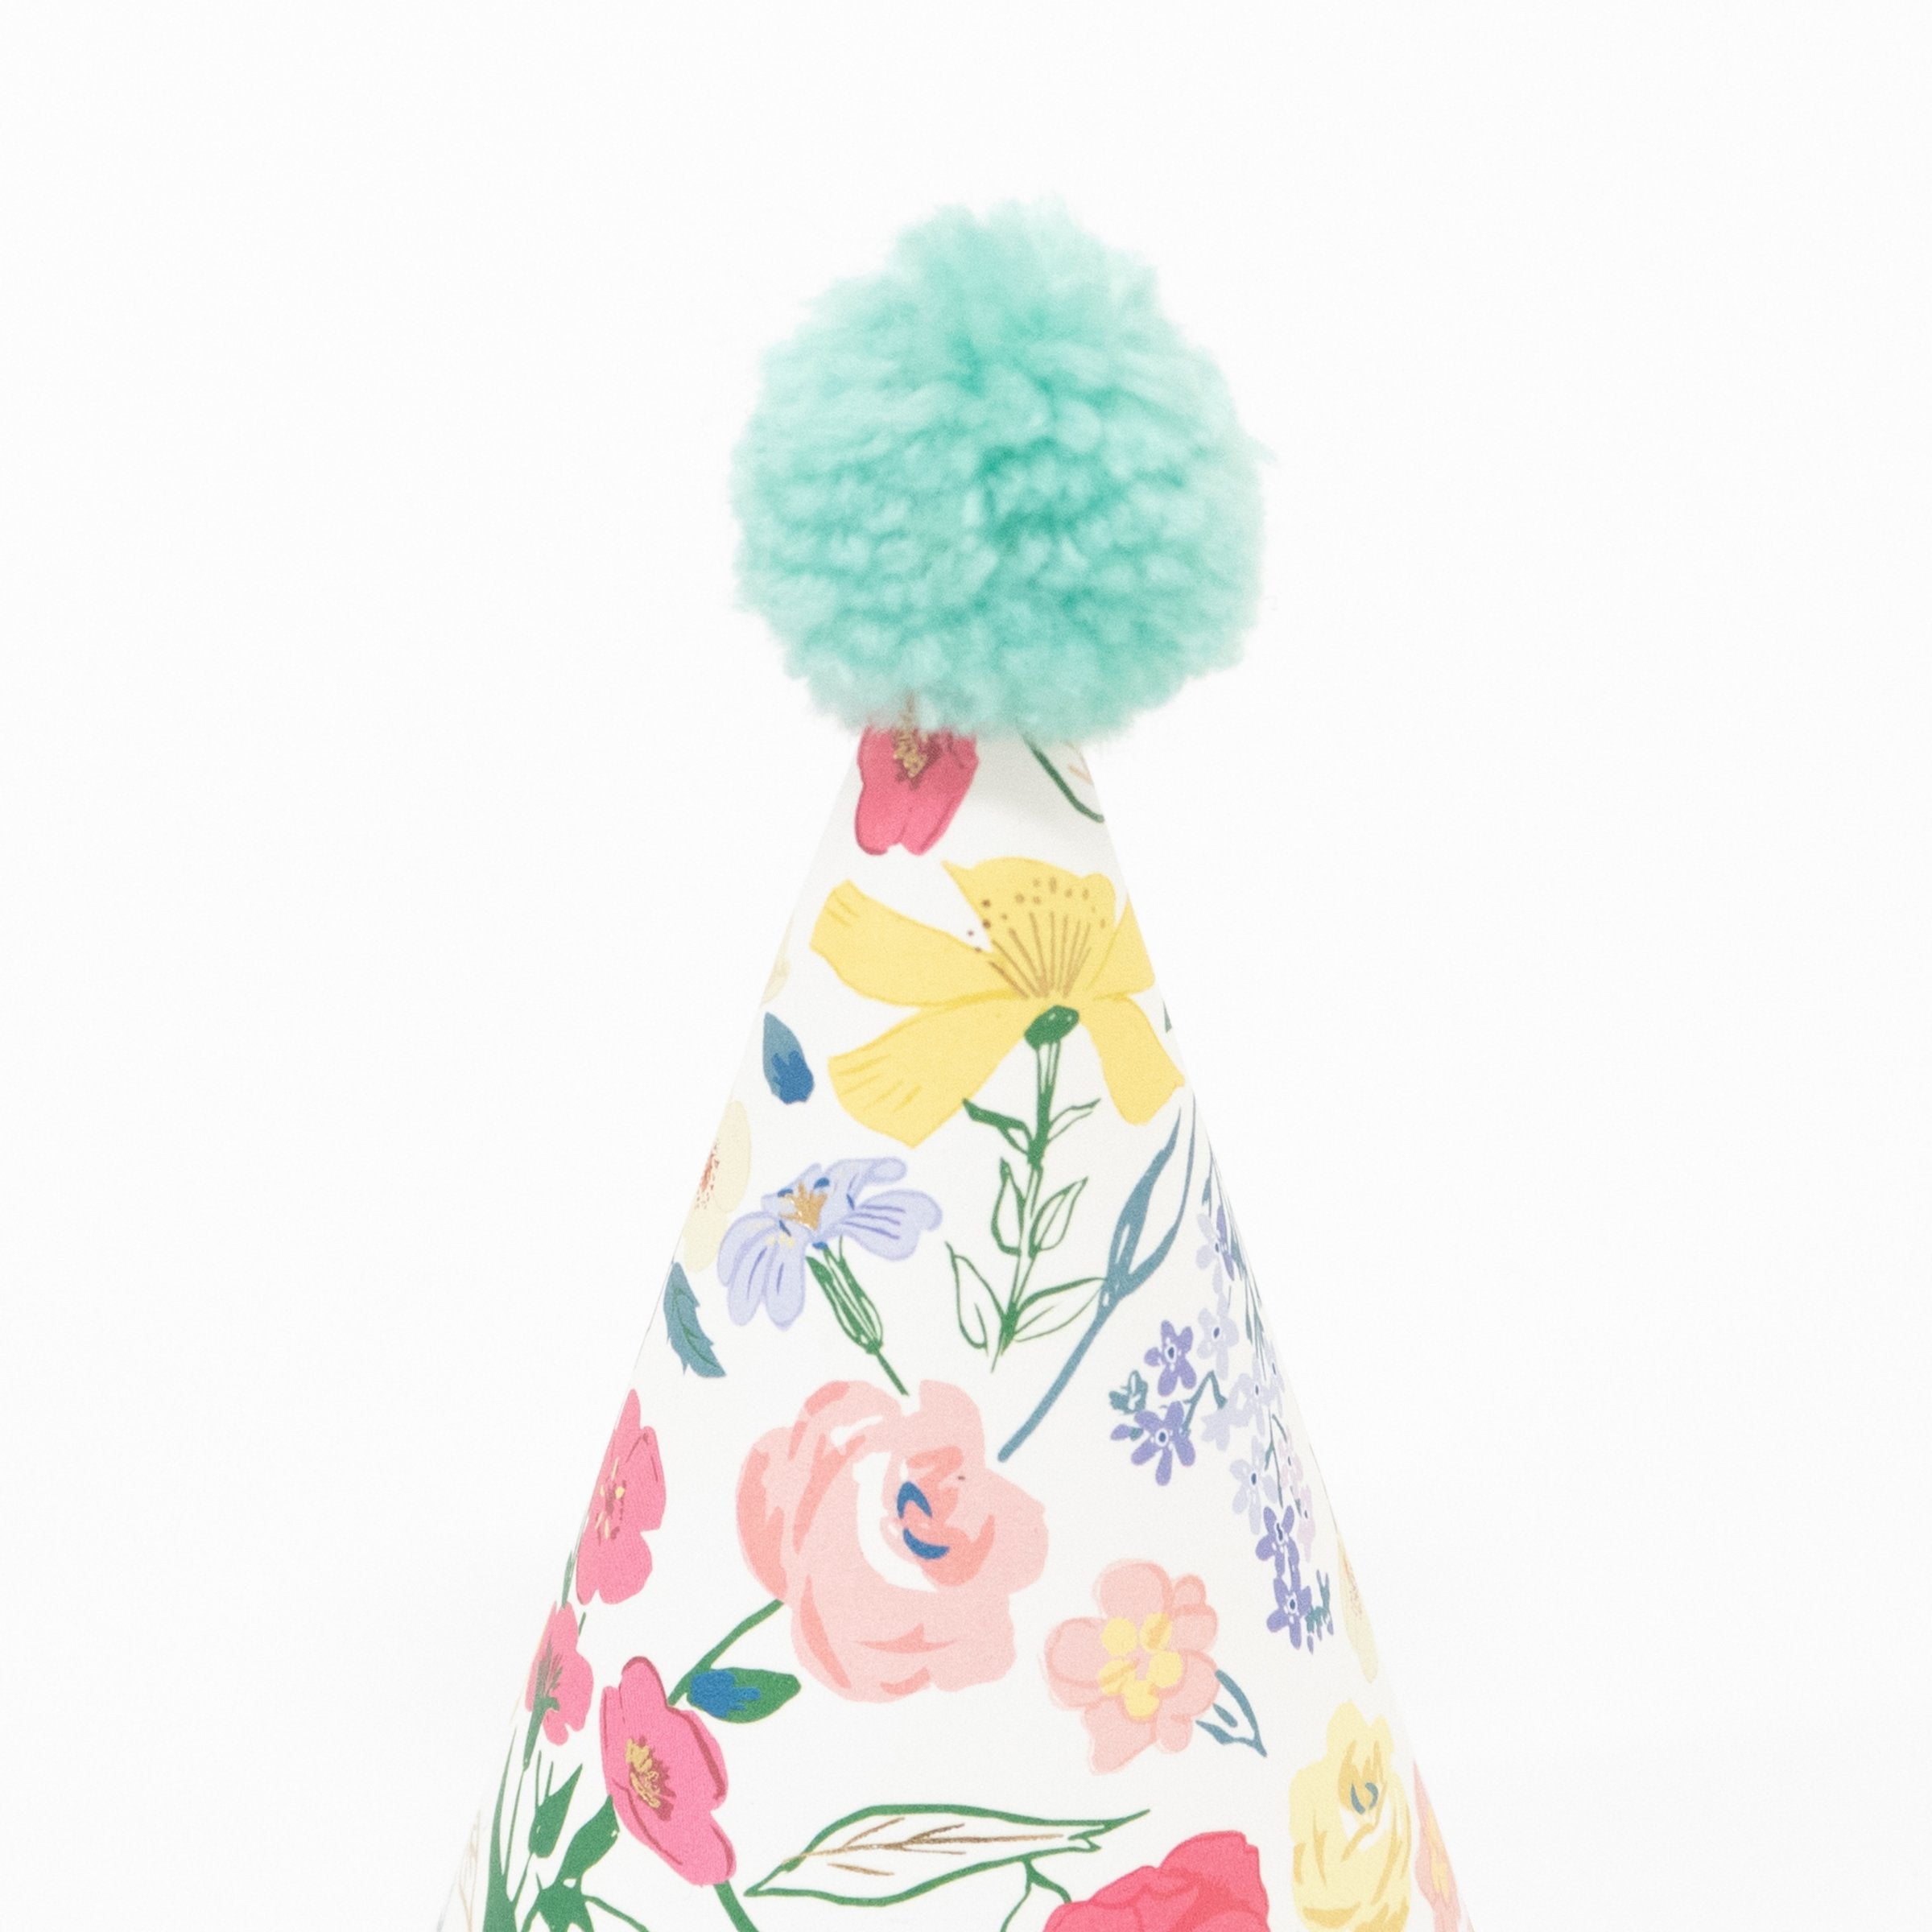 Make your party guests look amazing with our paper hats with floral designs and bright pompoms.